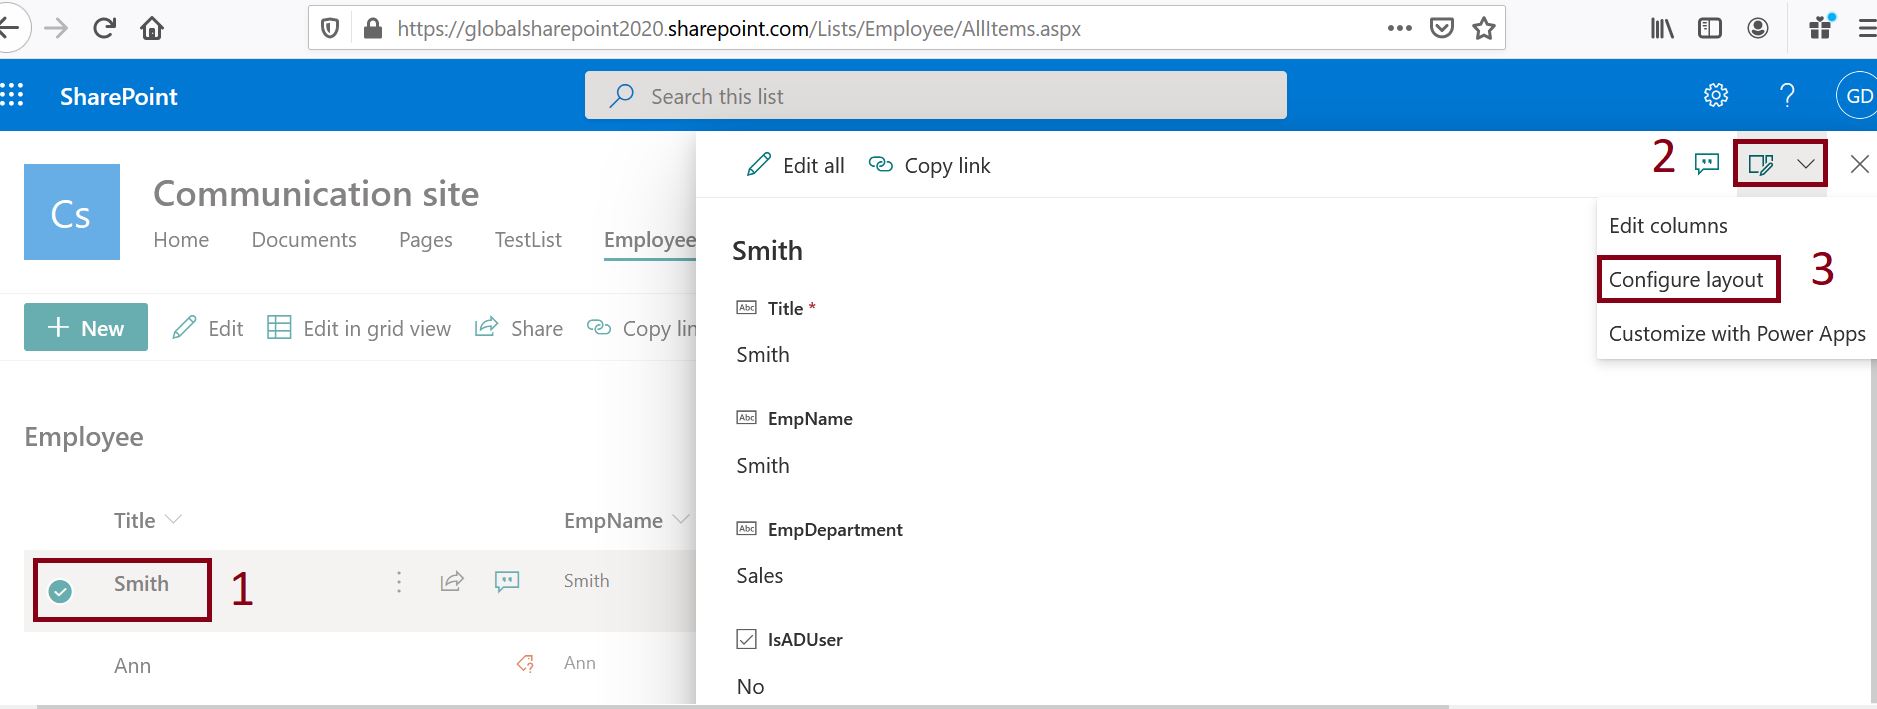 Configure layout in SharePoint Online list form